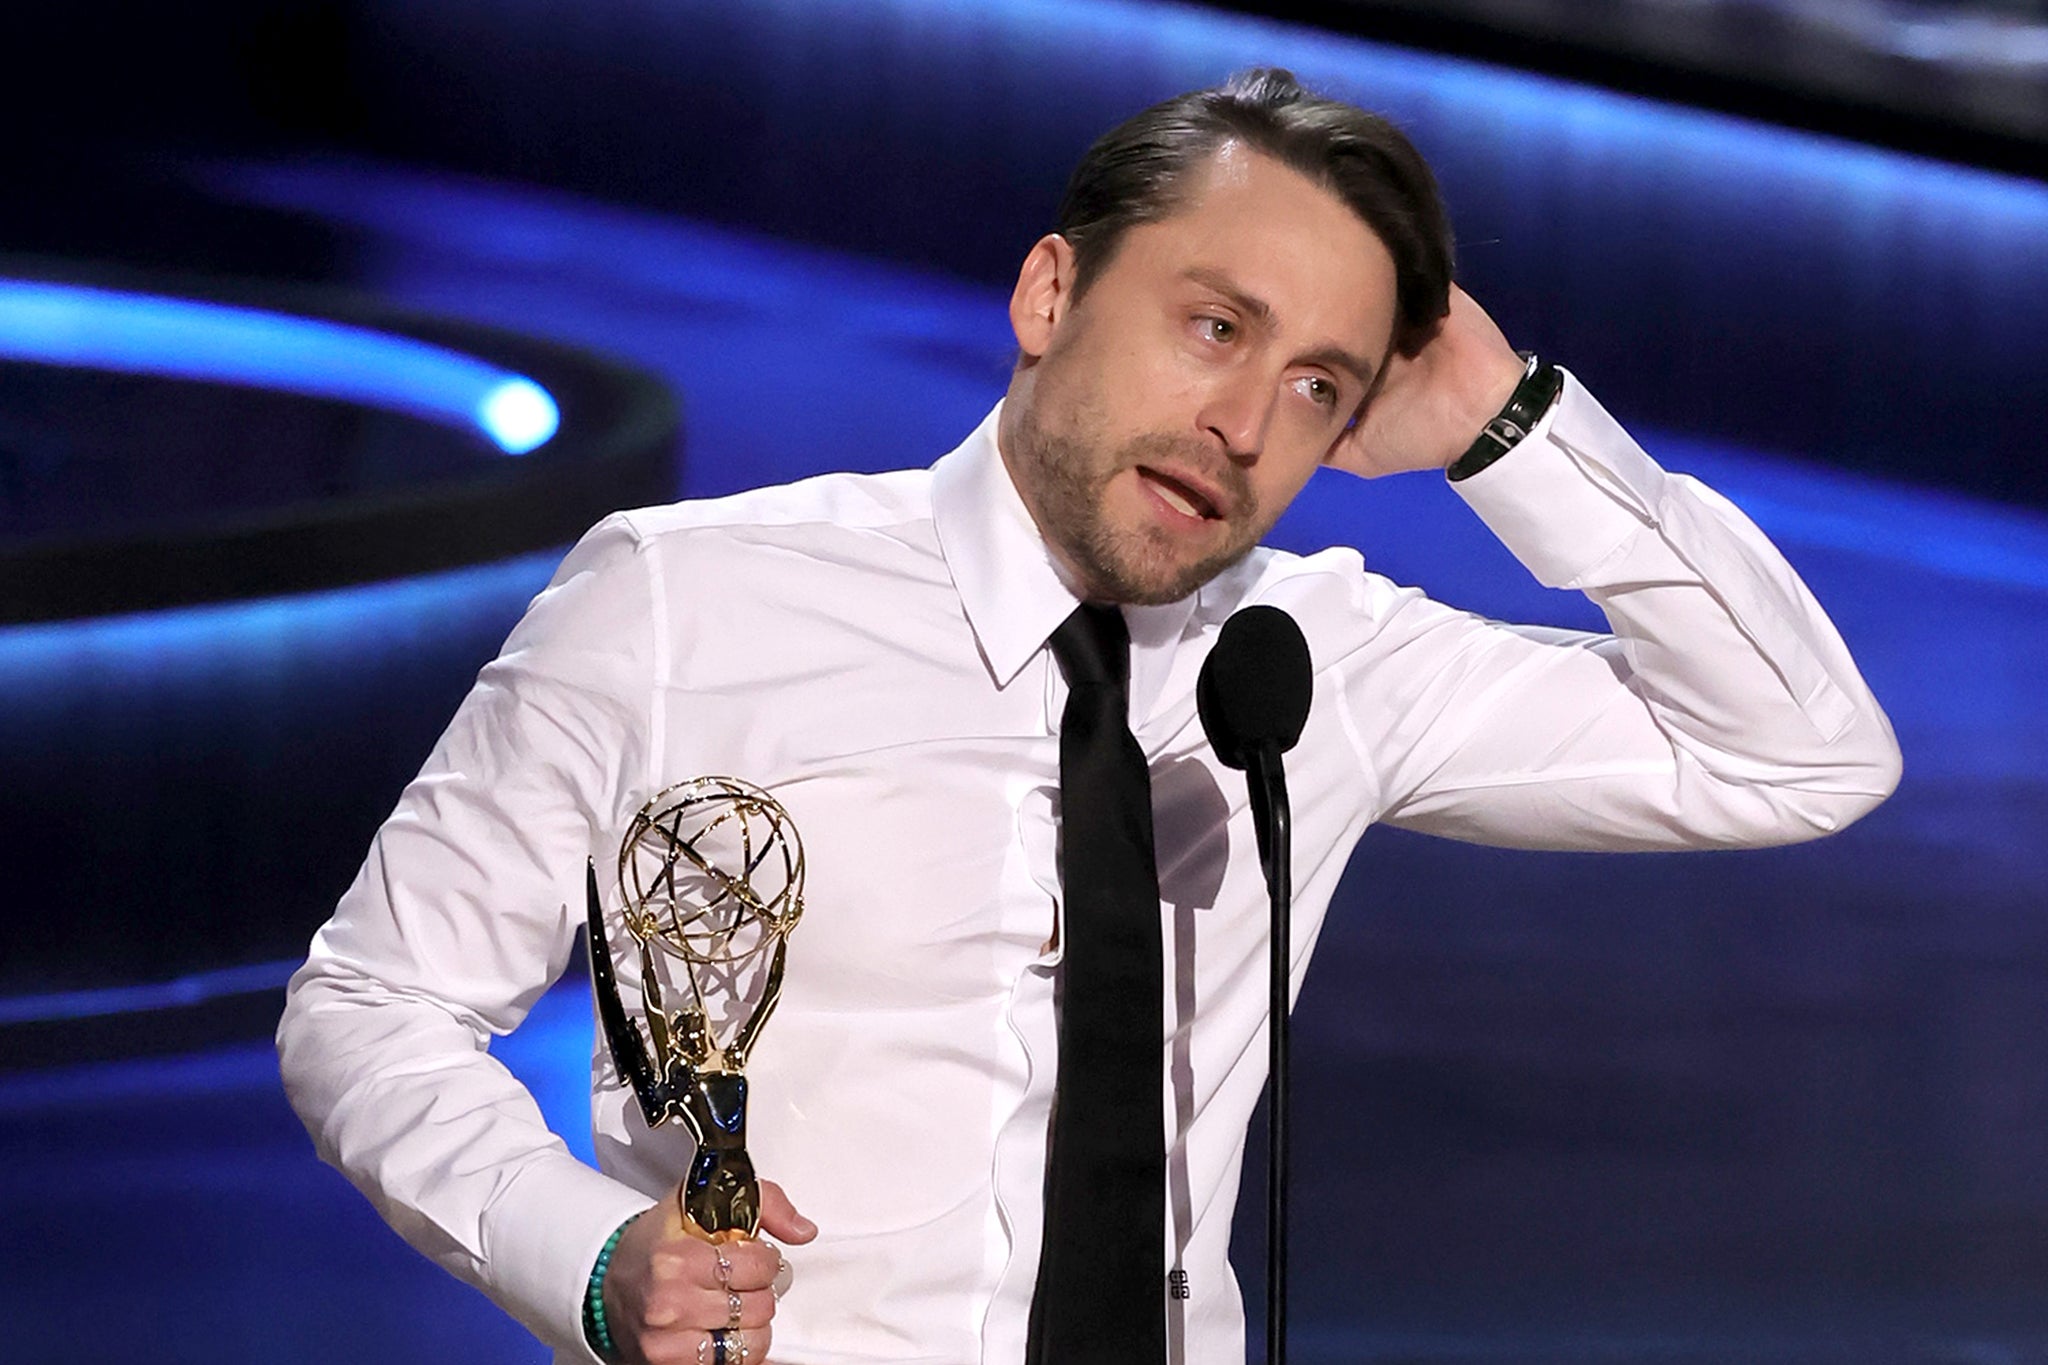 Well-calibrated verisimilitude: Kieran Culkin delivers a charming acceptance speech for his role in ‘Succession’ at last night’s Emmys